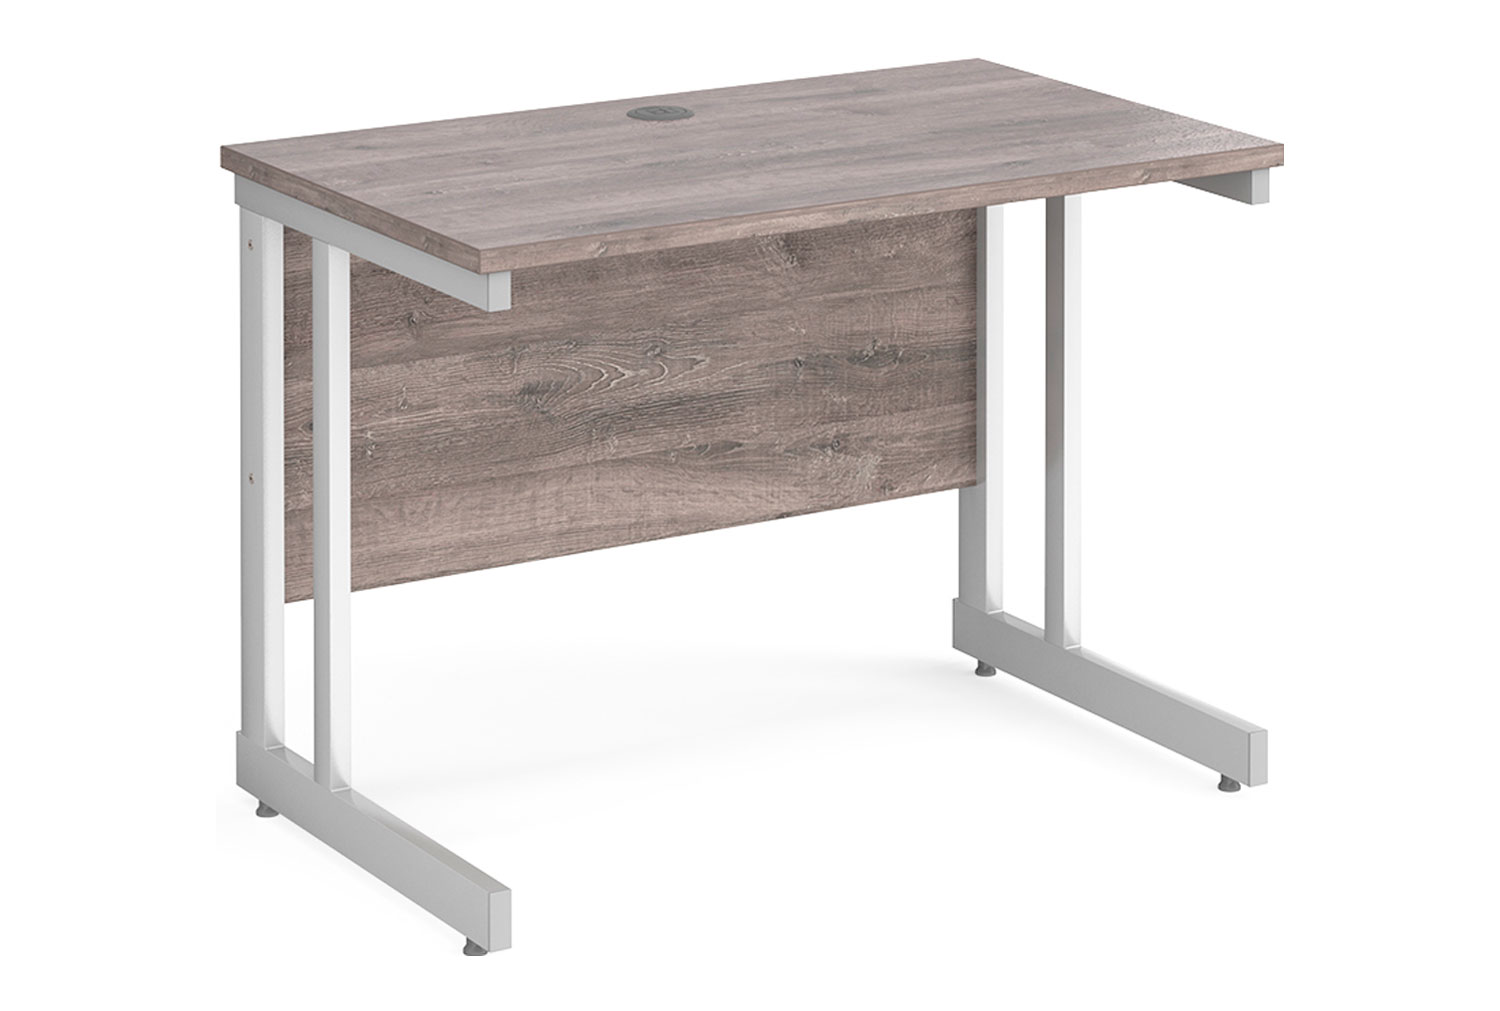 Tully II Narrow Rectangular Office Desk, 100wx60dx73h (cm), Grey Oak, Express Delivery